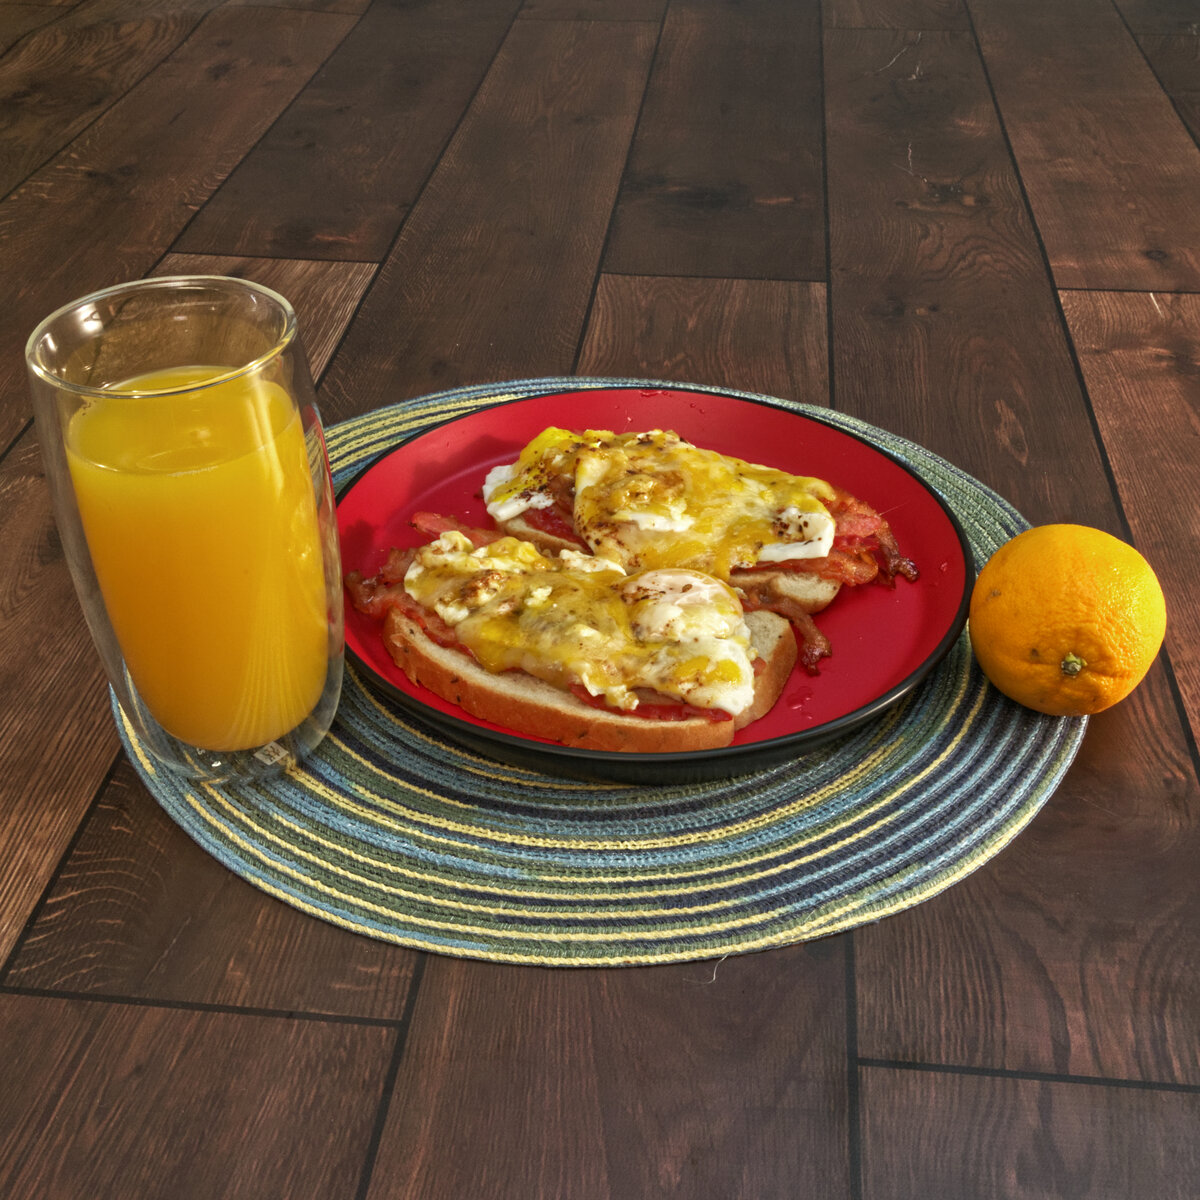 Bacon and Eggs on Rye Bread with Orange Juice and an Orange